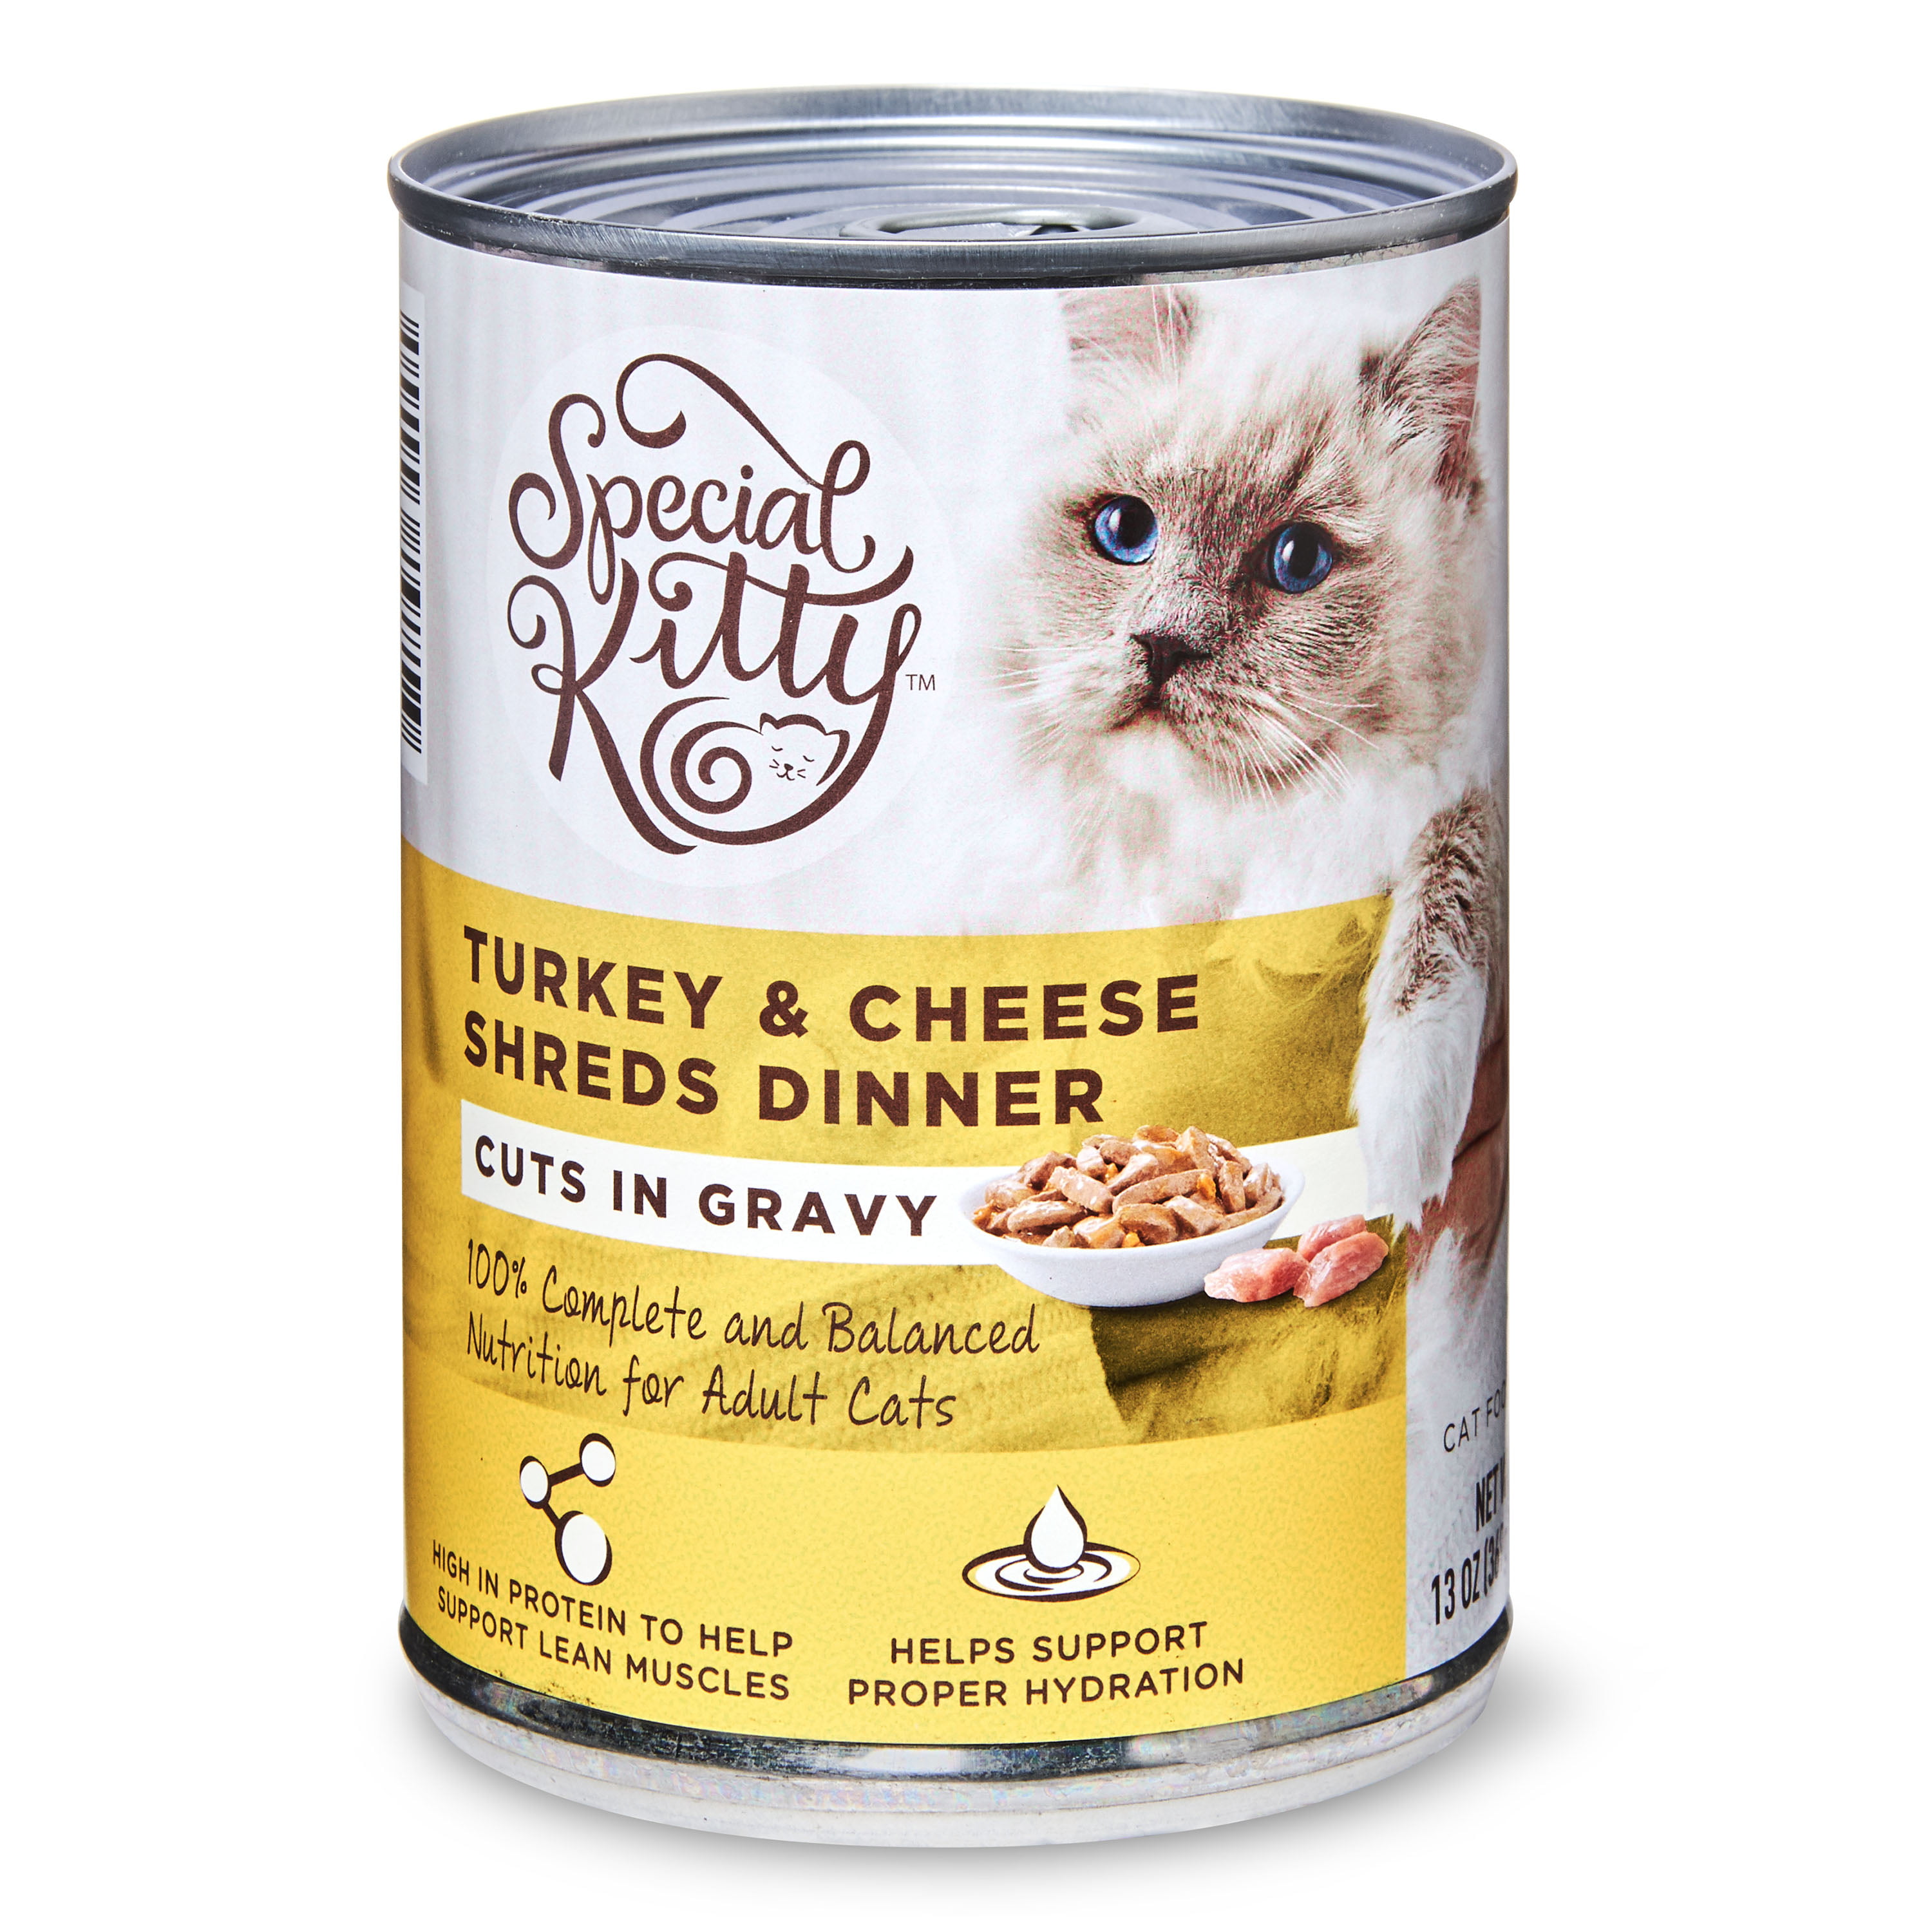 9 Lives Gravy Favorites Wet Cat Food Variety Pack, 5.5Ounce Cans, 12